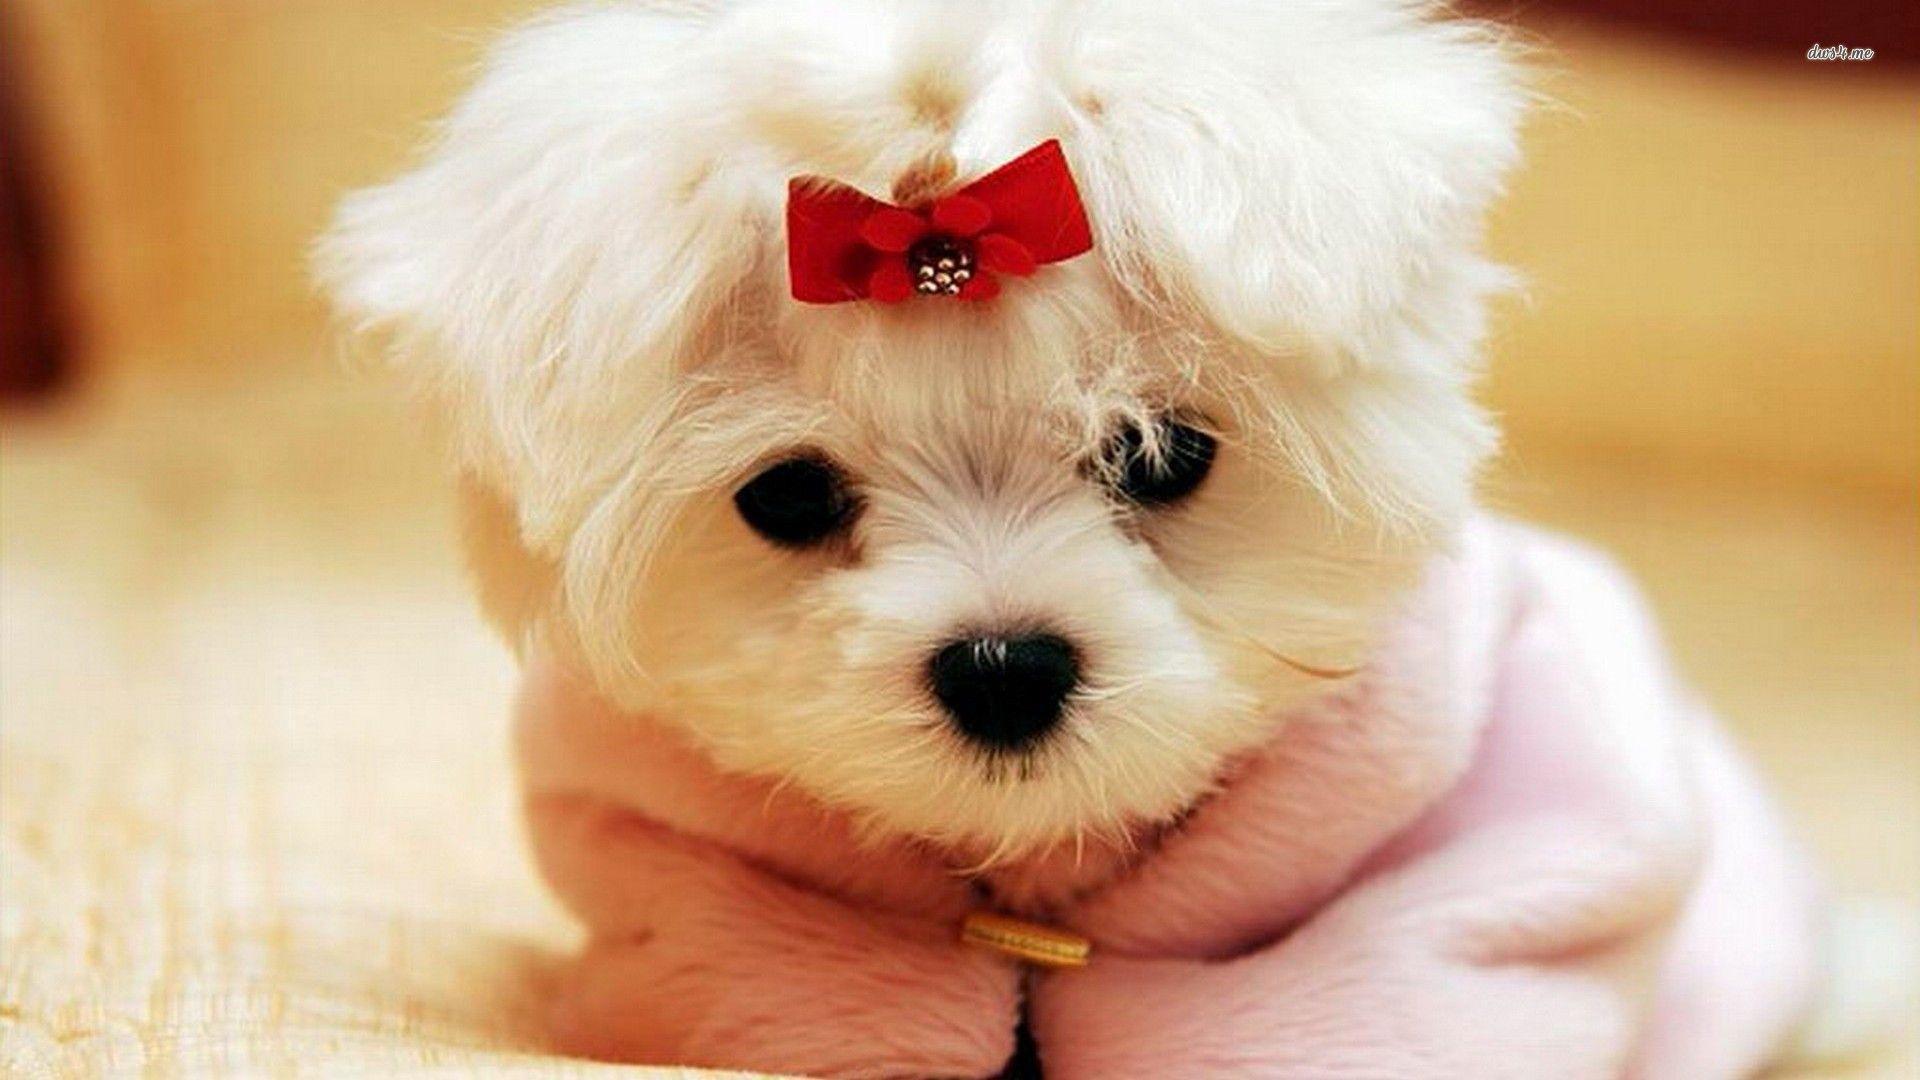 Top Maltese Puppy Photo In High Quality GoldWallpaper